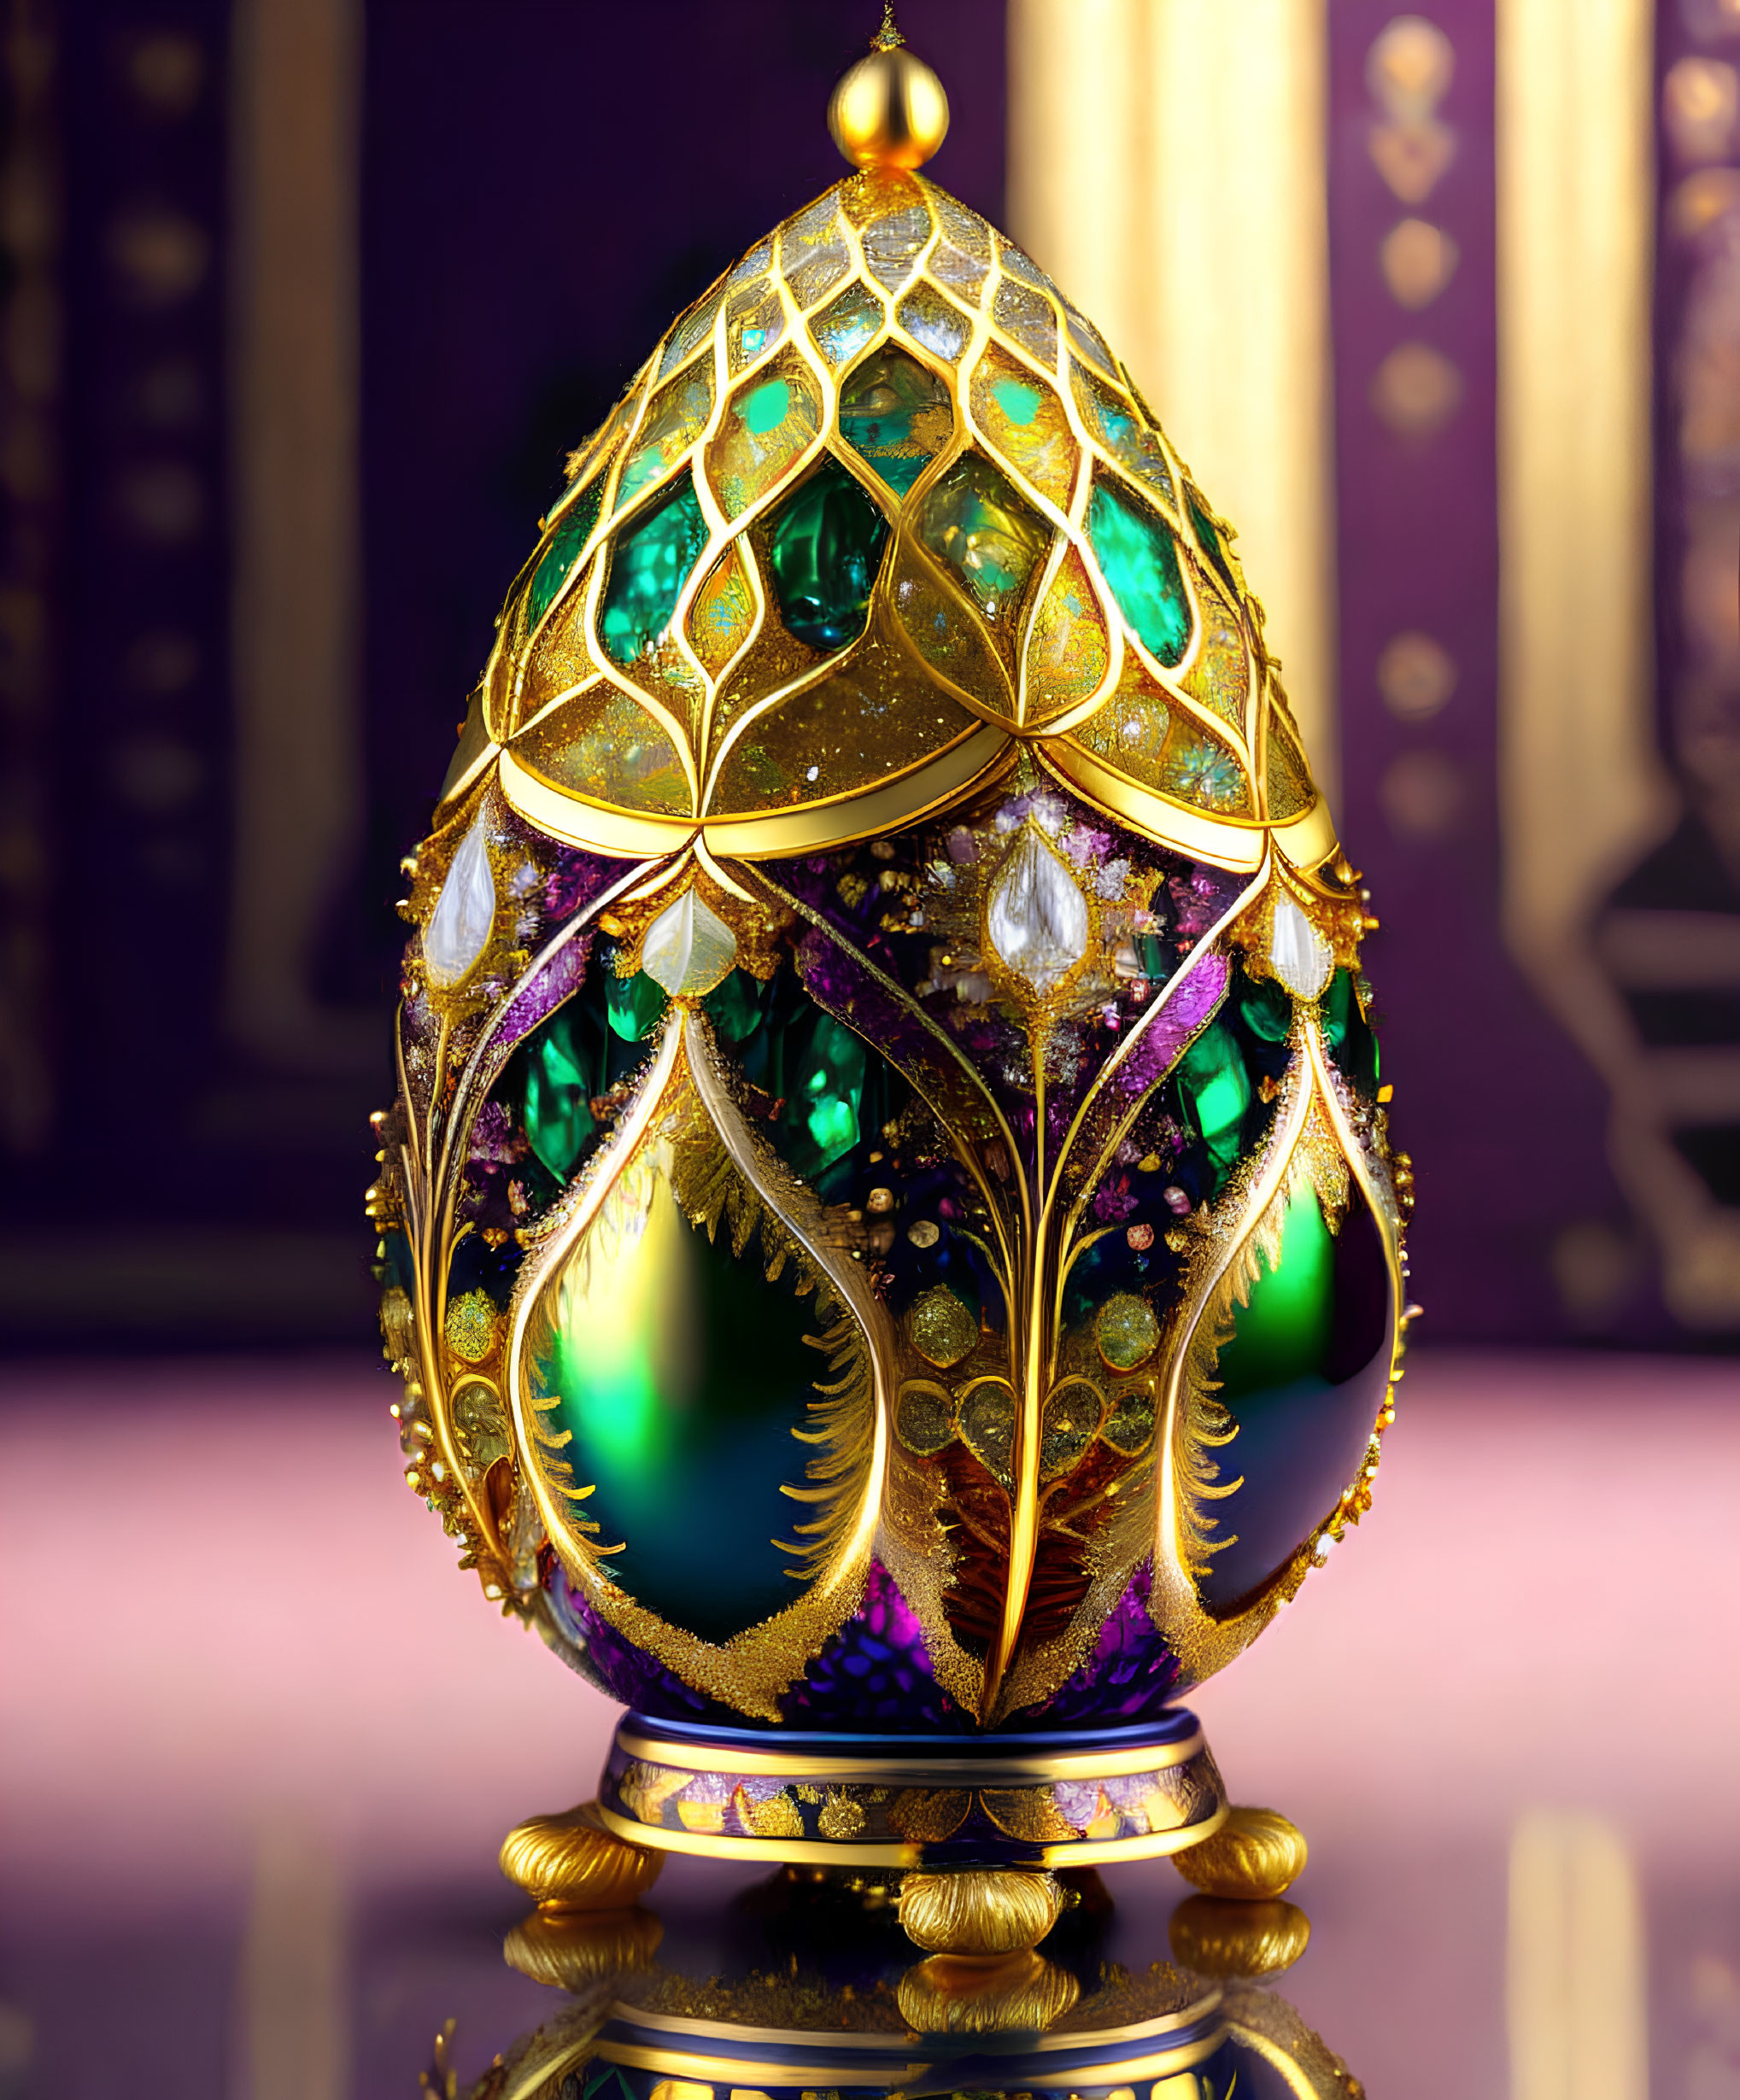 Intricate Fabergé Egg with Gold Filigree and Gem Adornments